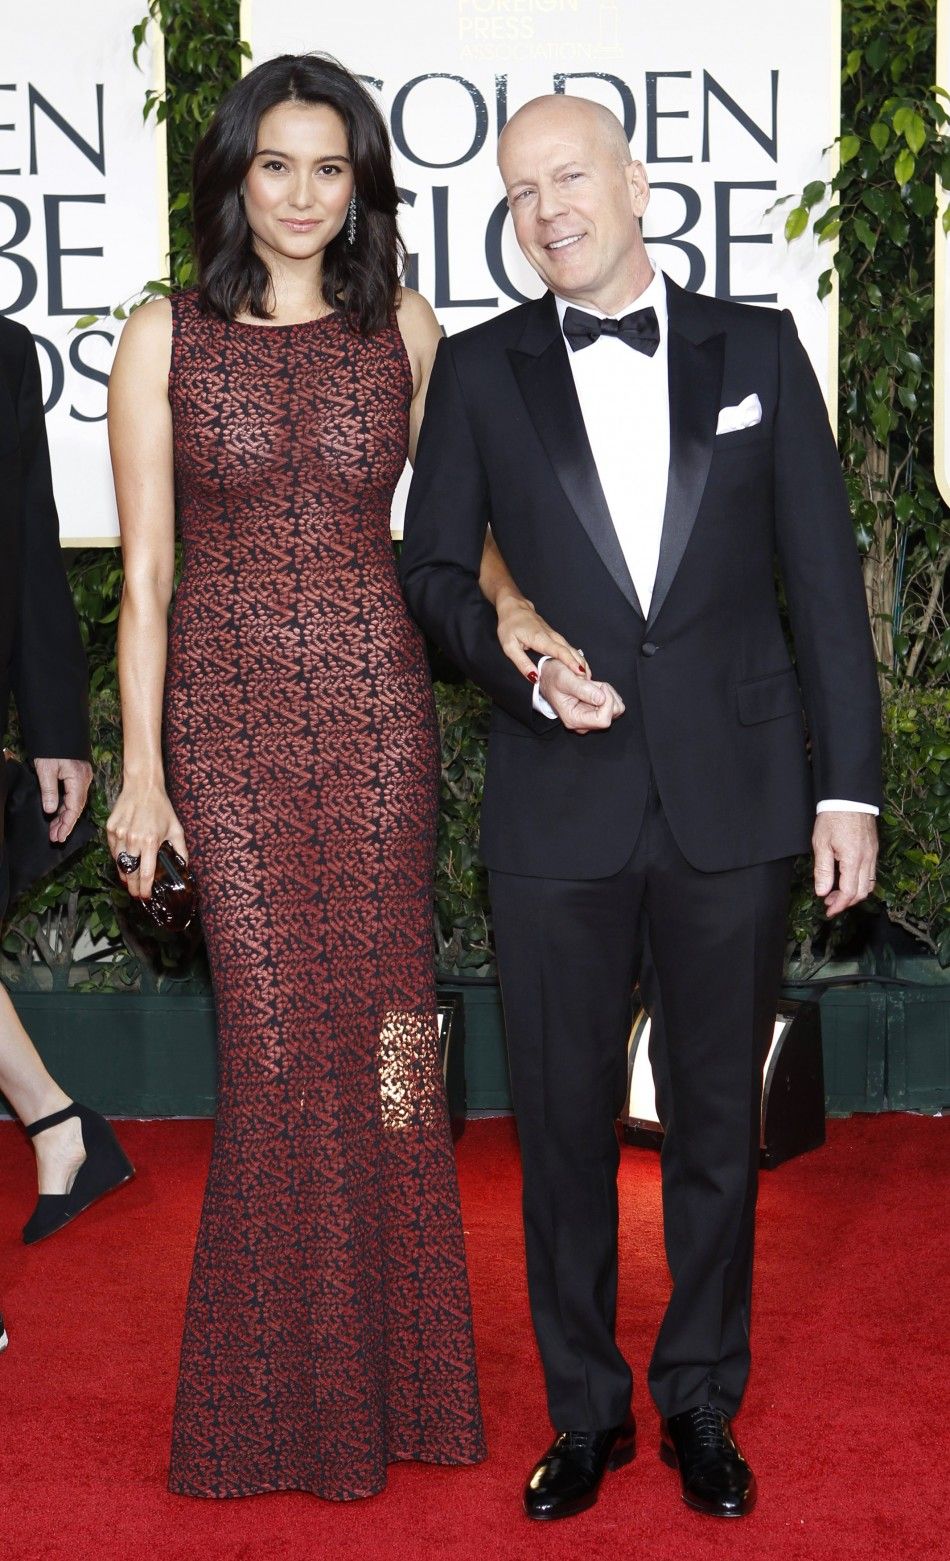 Bruce Willis and wife Emma arrive at the 68th annual Golden Globe Awards in Beverly Hills